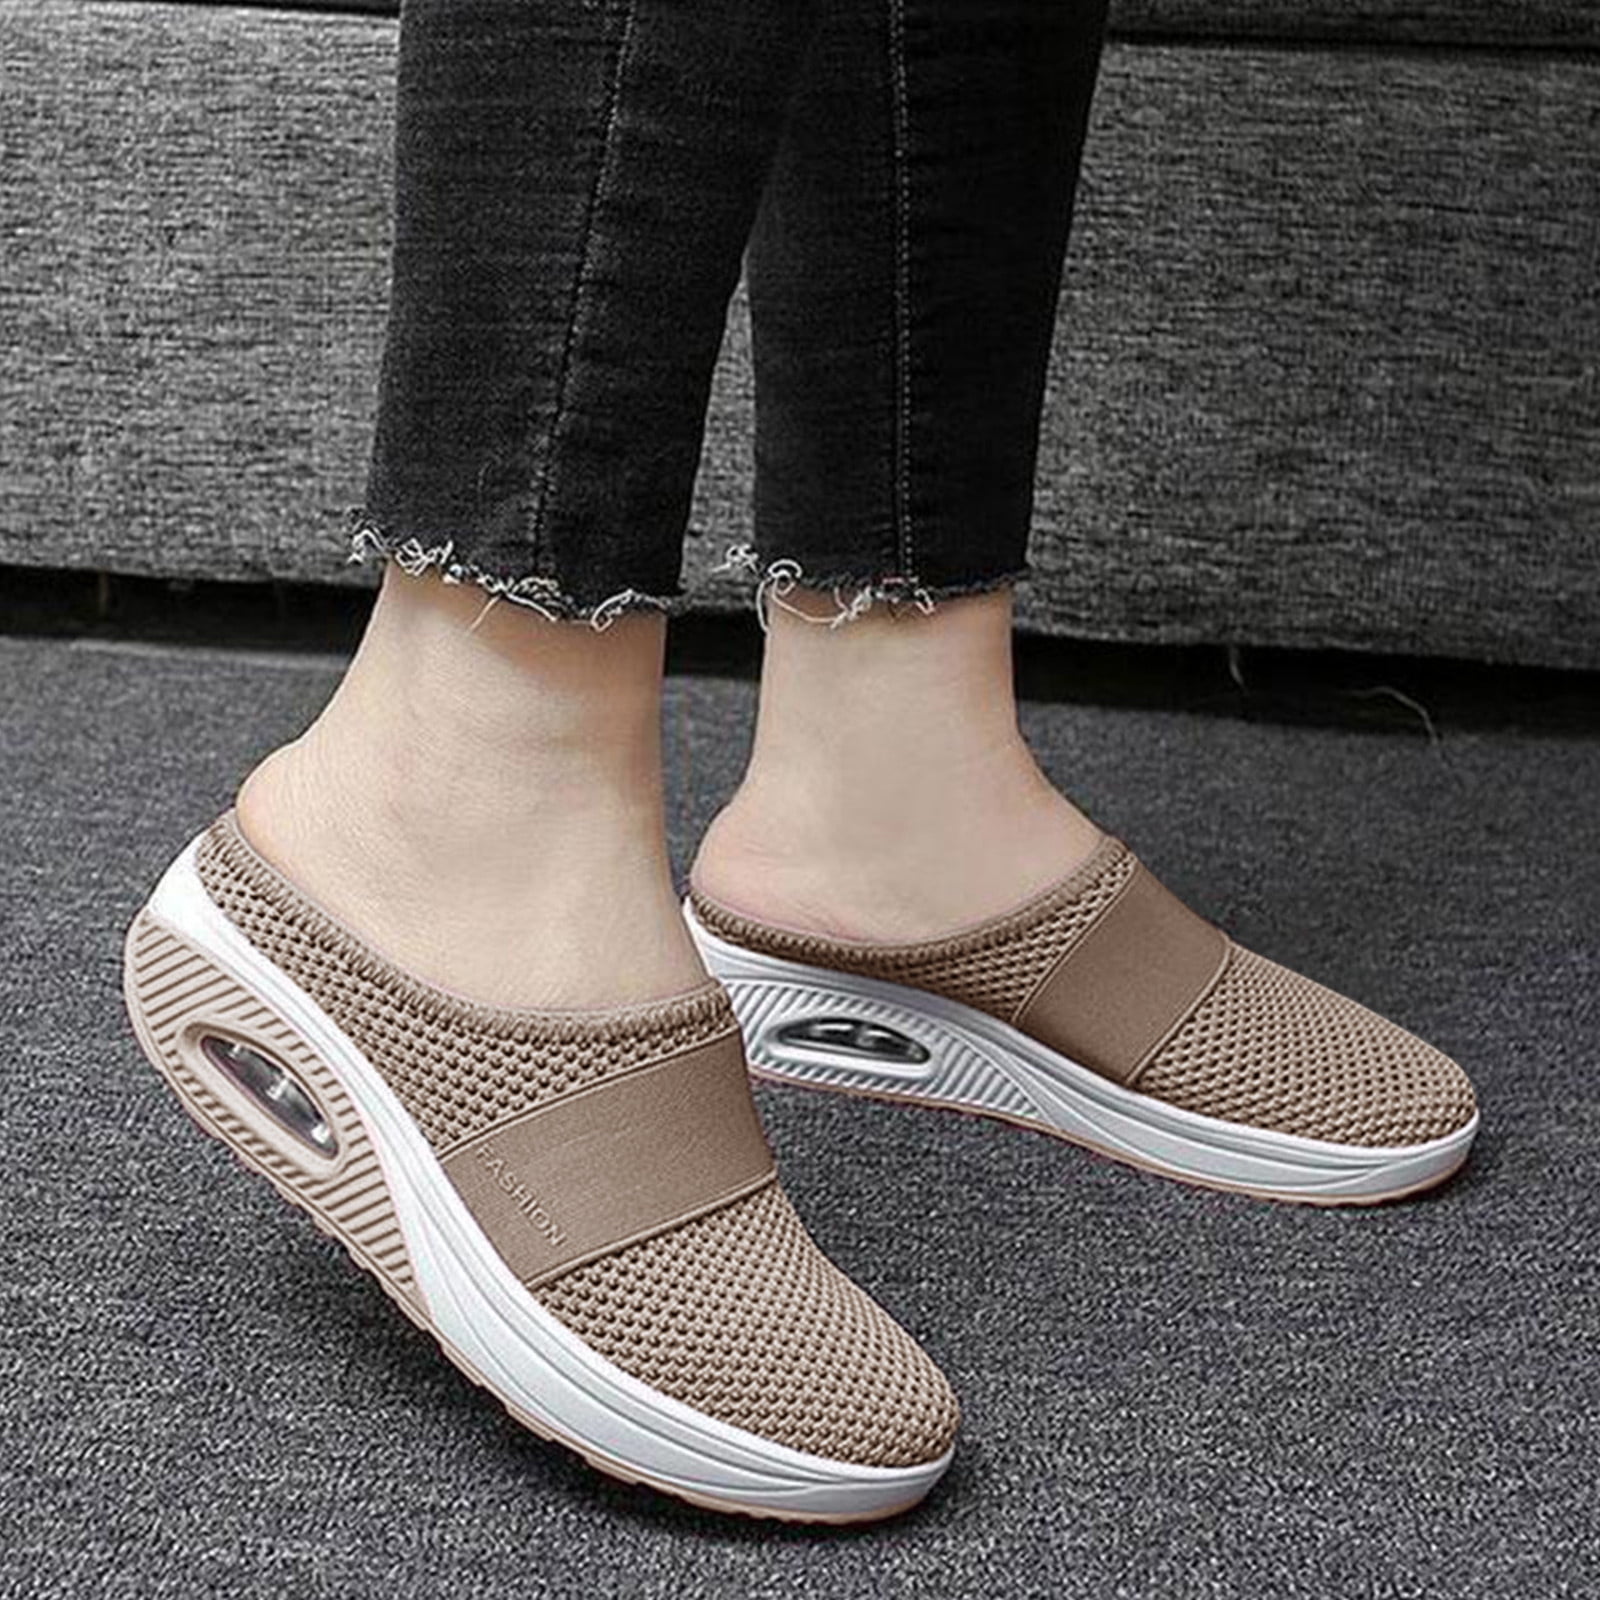 Womens Ladies Girls Casual Walking Flat Trainer Shoes Lace Up Trainers Pump Size 